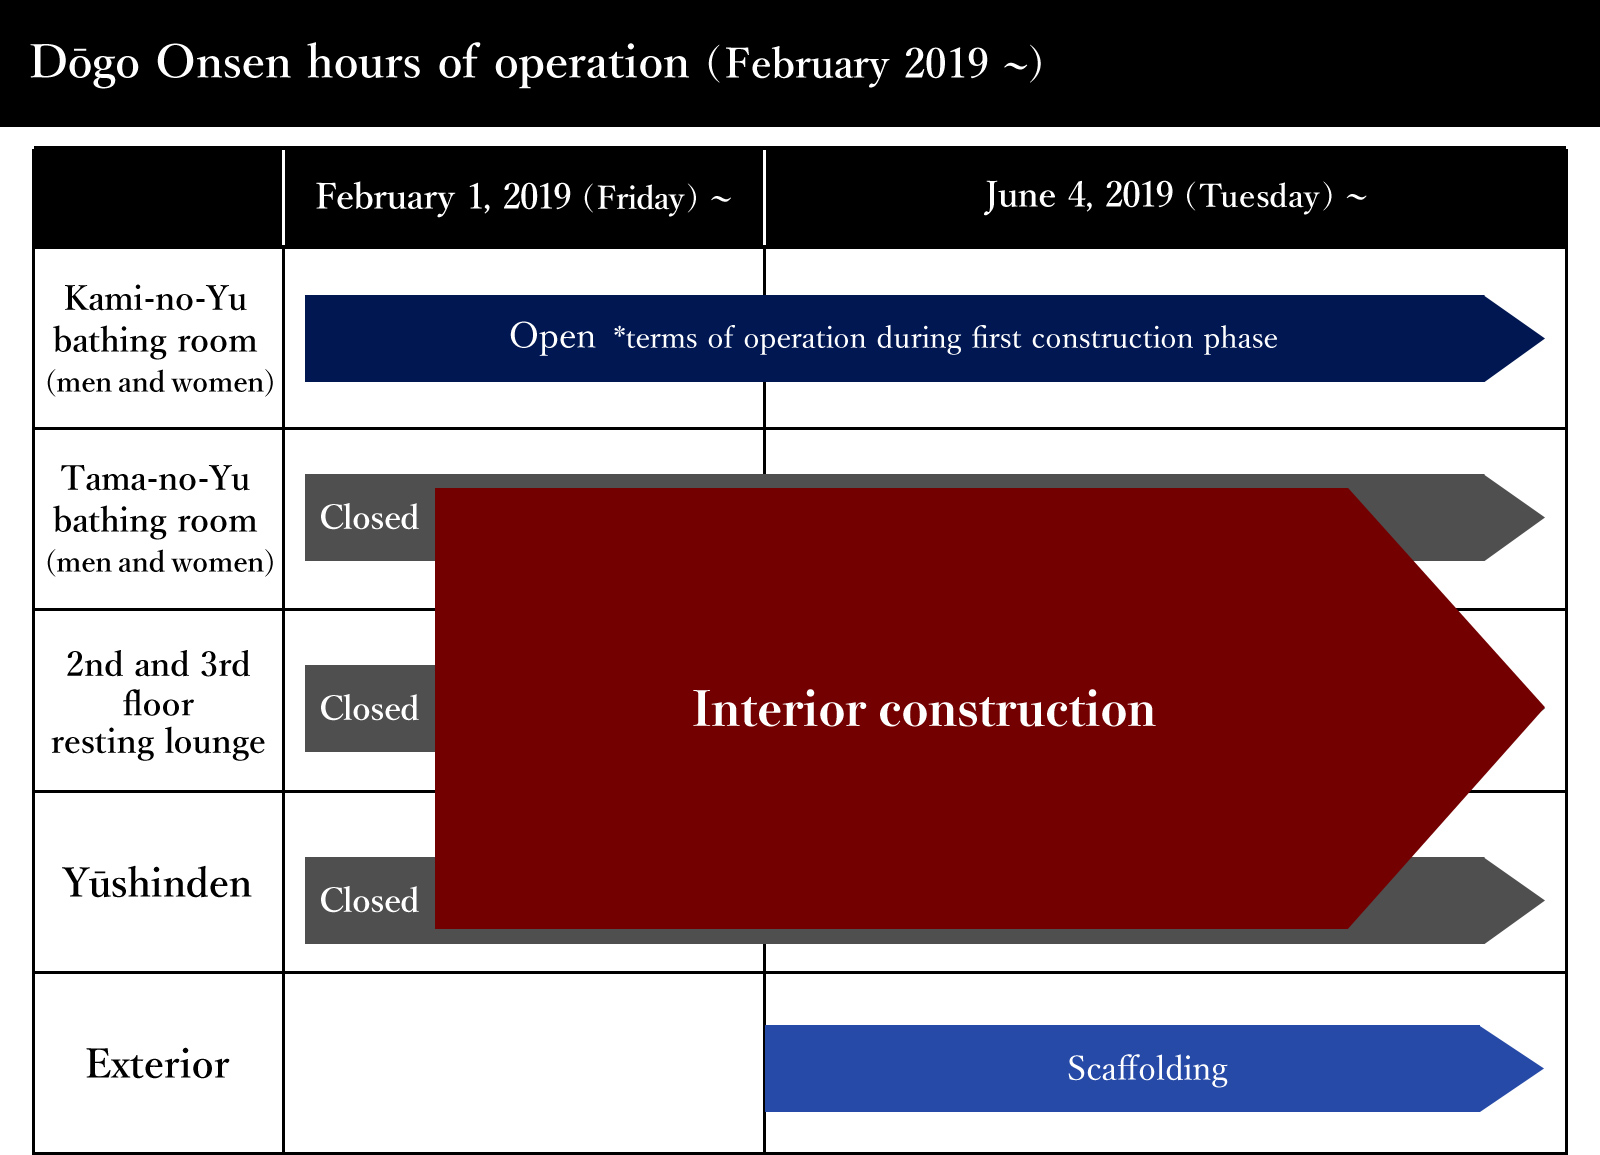 Dō>go Onsen hours of operation (February 2019 ~)